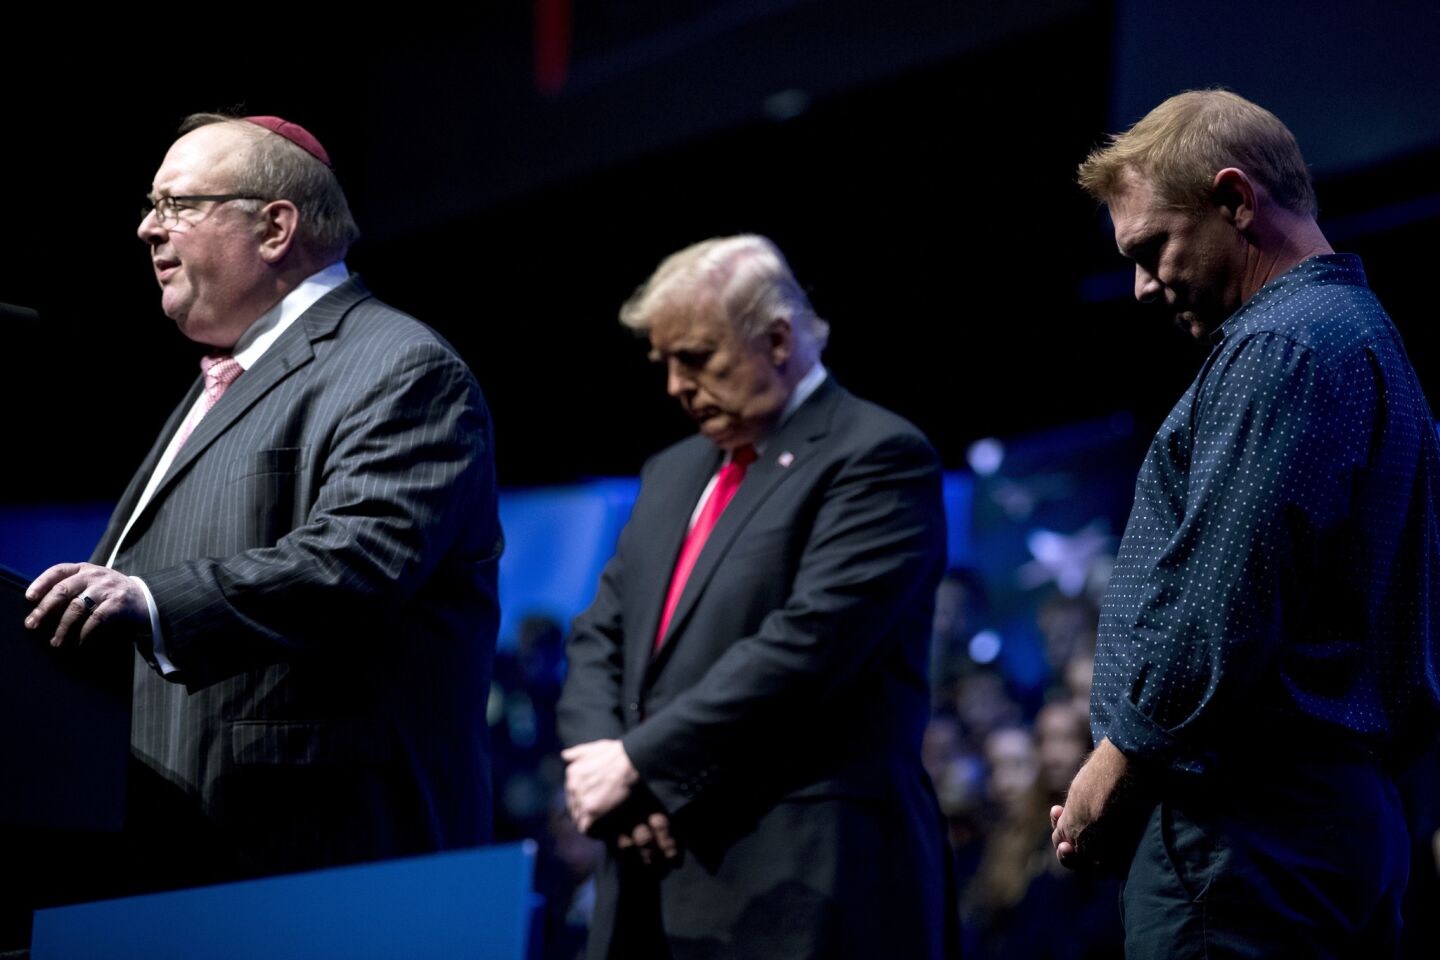 Rabbi Benjamin Sendrow, left, accompanied by President Donald Trump and the Rev. Thom O'Leary, prays at the 91st annual Future Farmers of America Convention and Expo at Bankers Life Fieldhouse in Indianapolis on Oct. 27, 2018, following a shooting in a Pittsburgh synagogue.